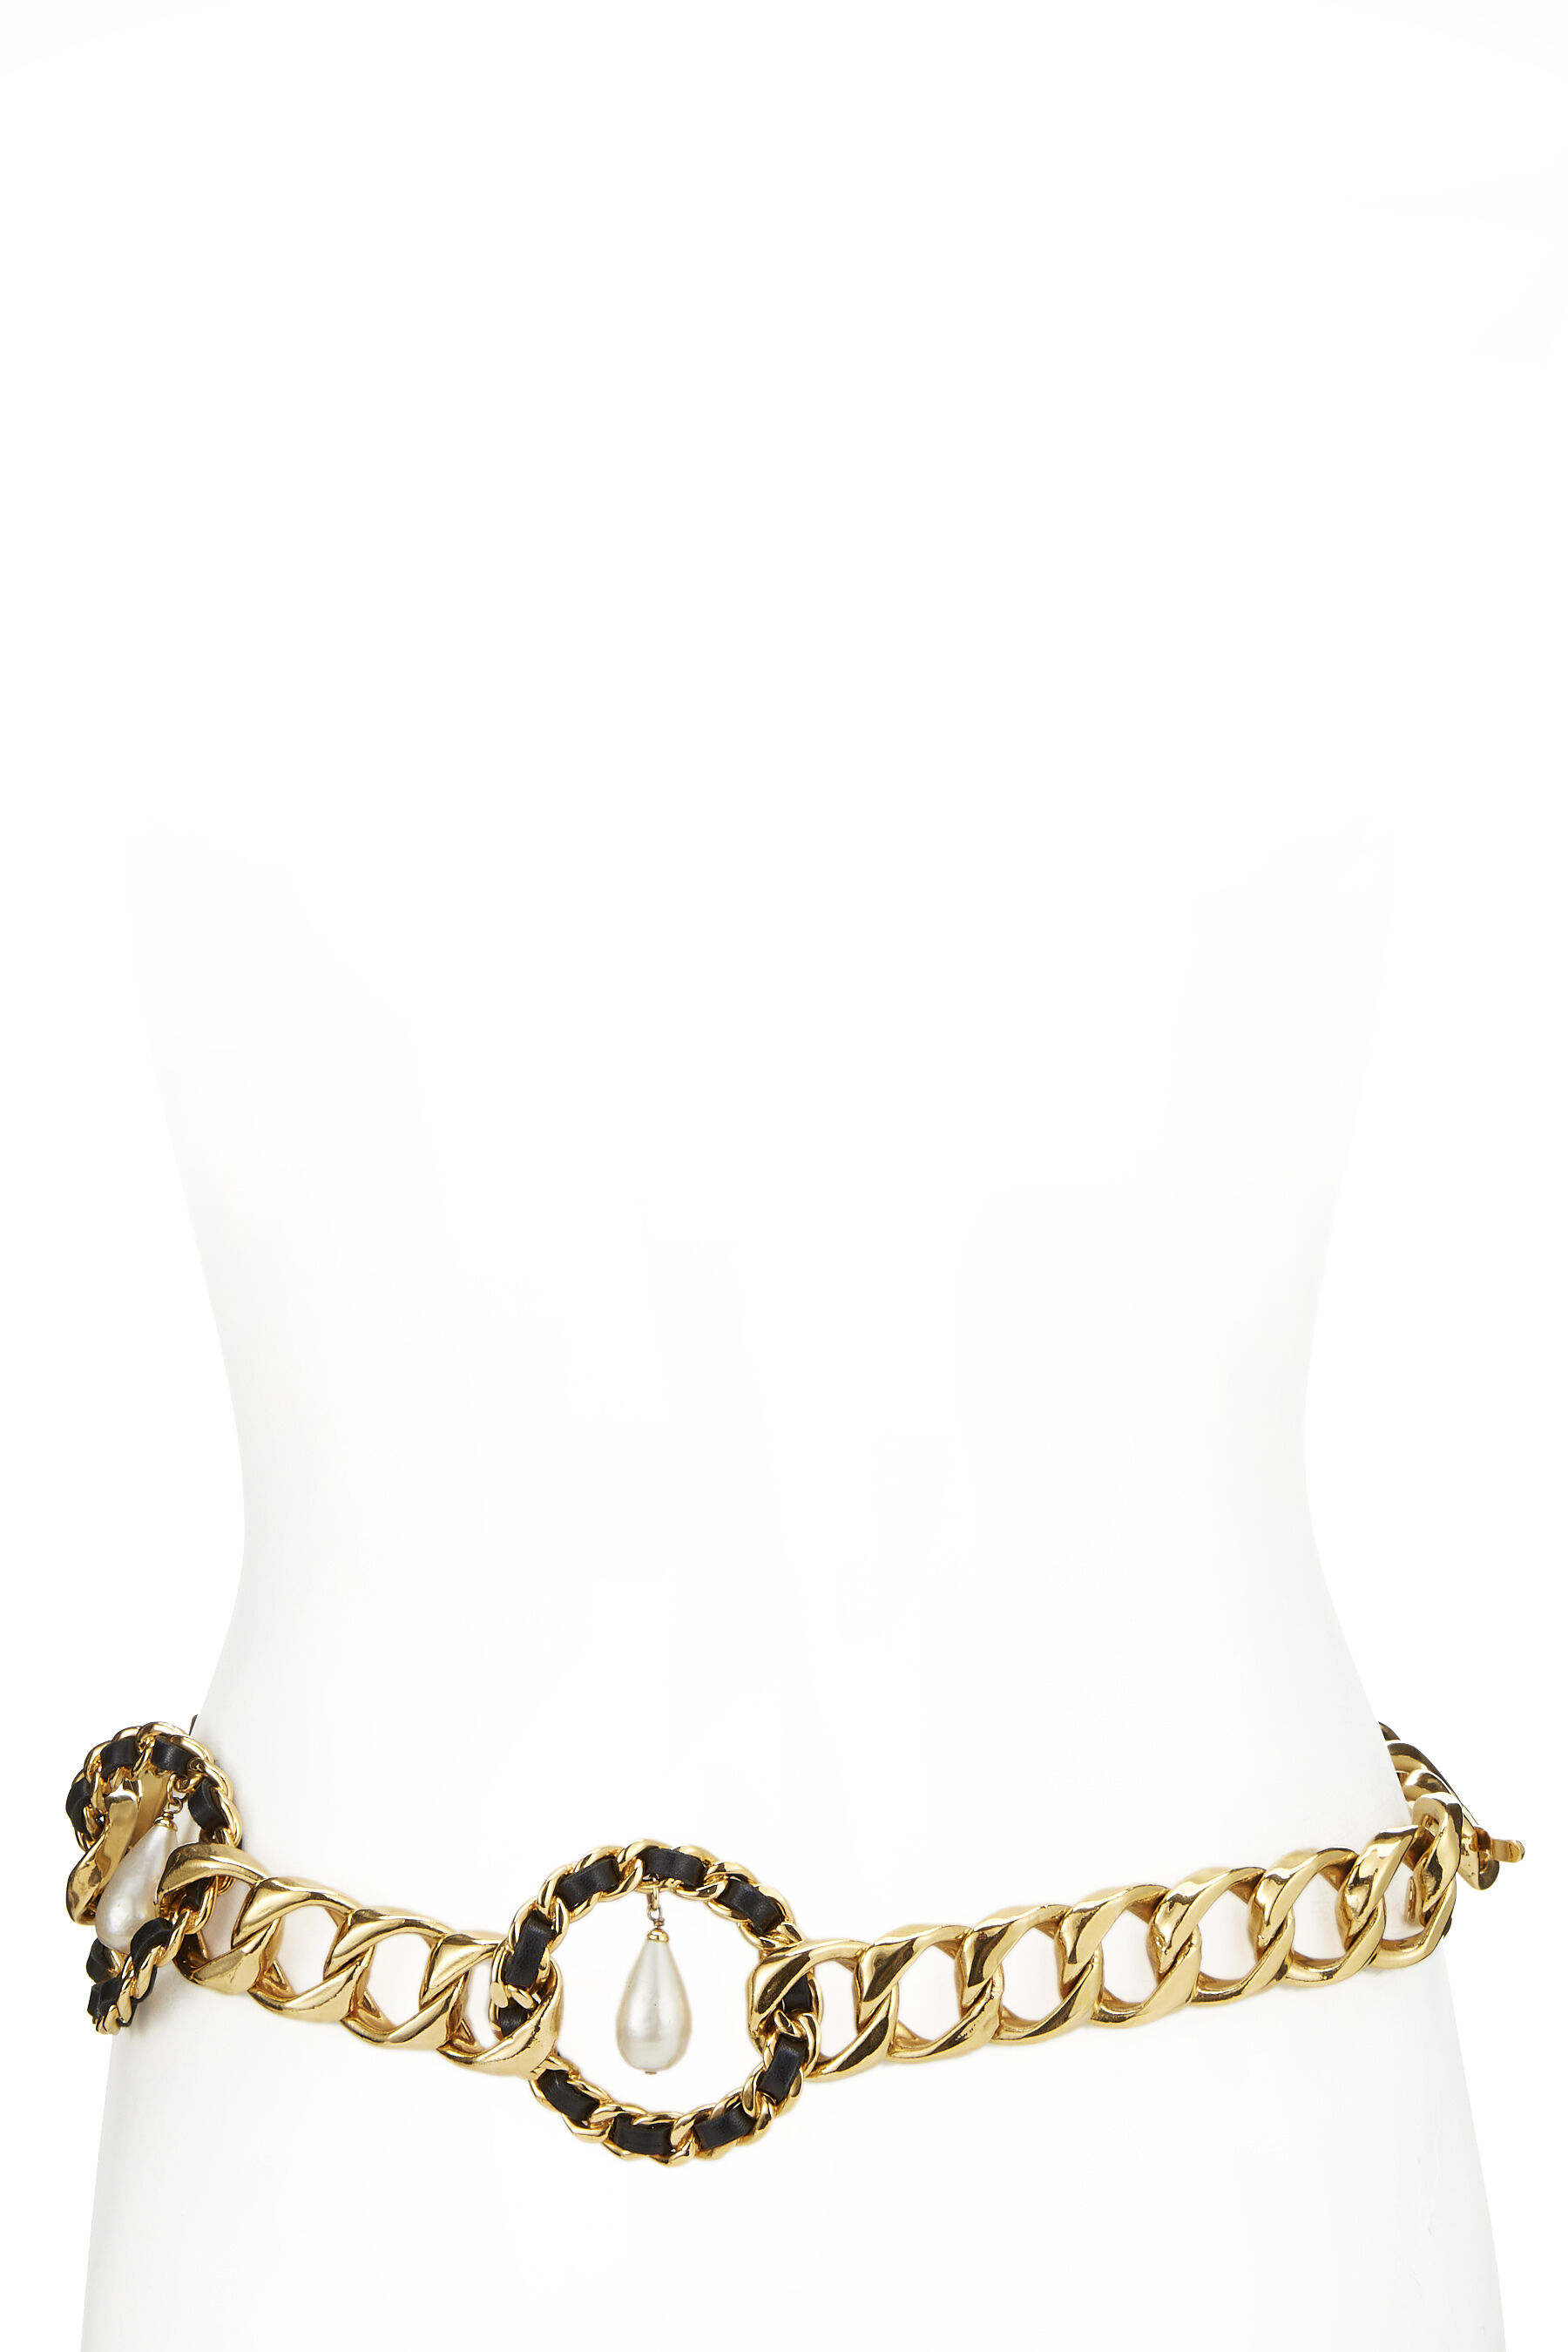 Chanel Multicolor Faux Pearl Beads Gold Tone Chain Necklace/Belt Chanel